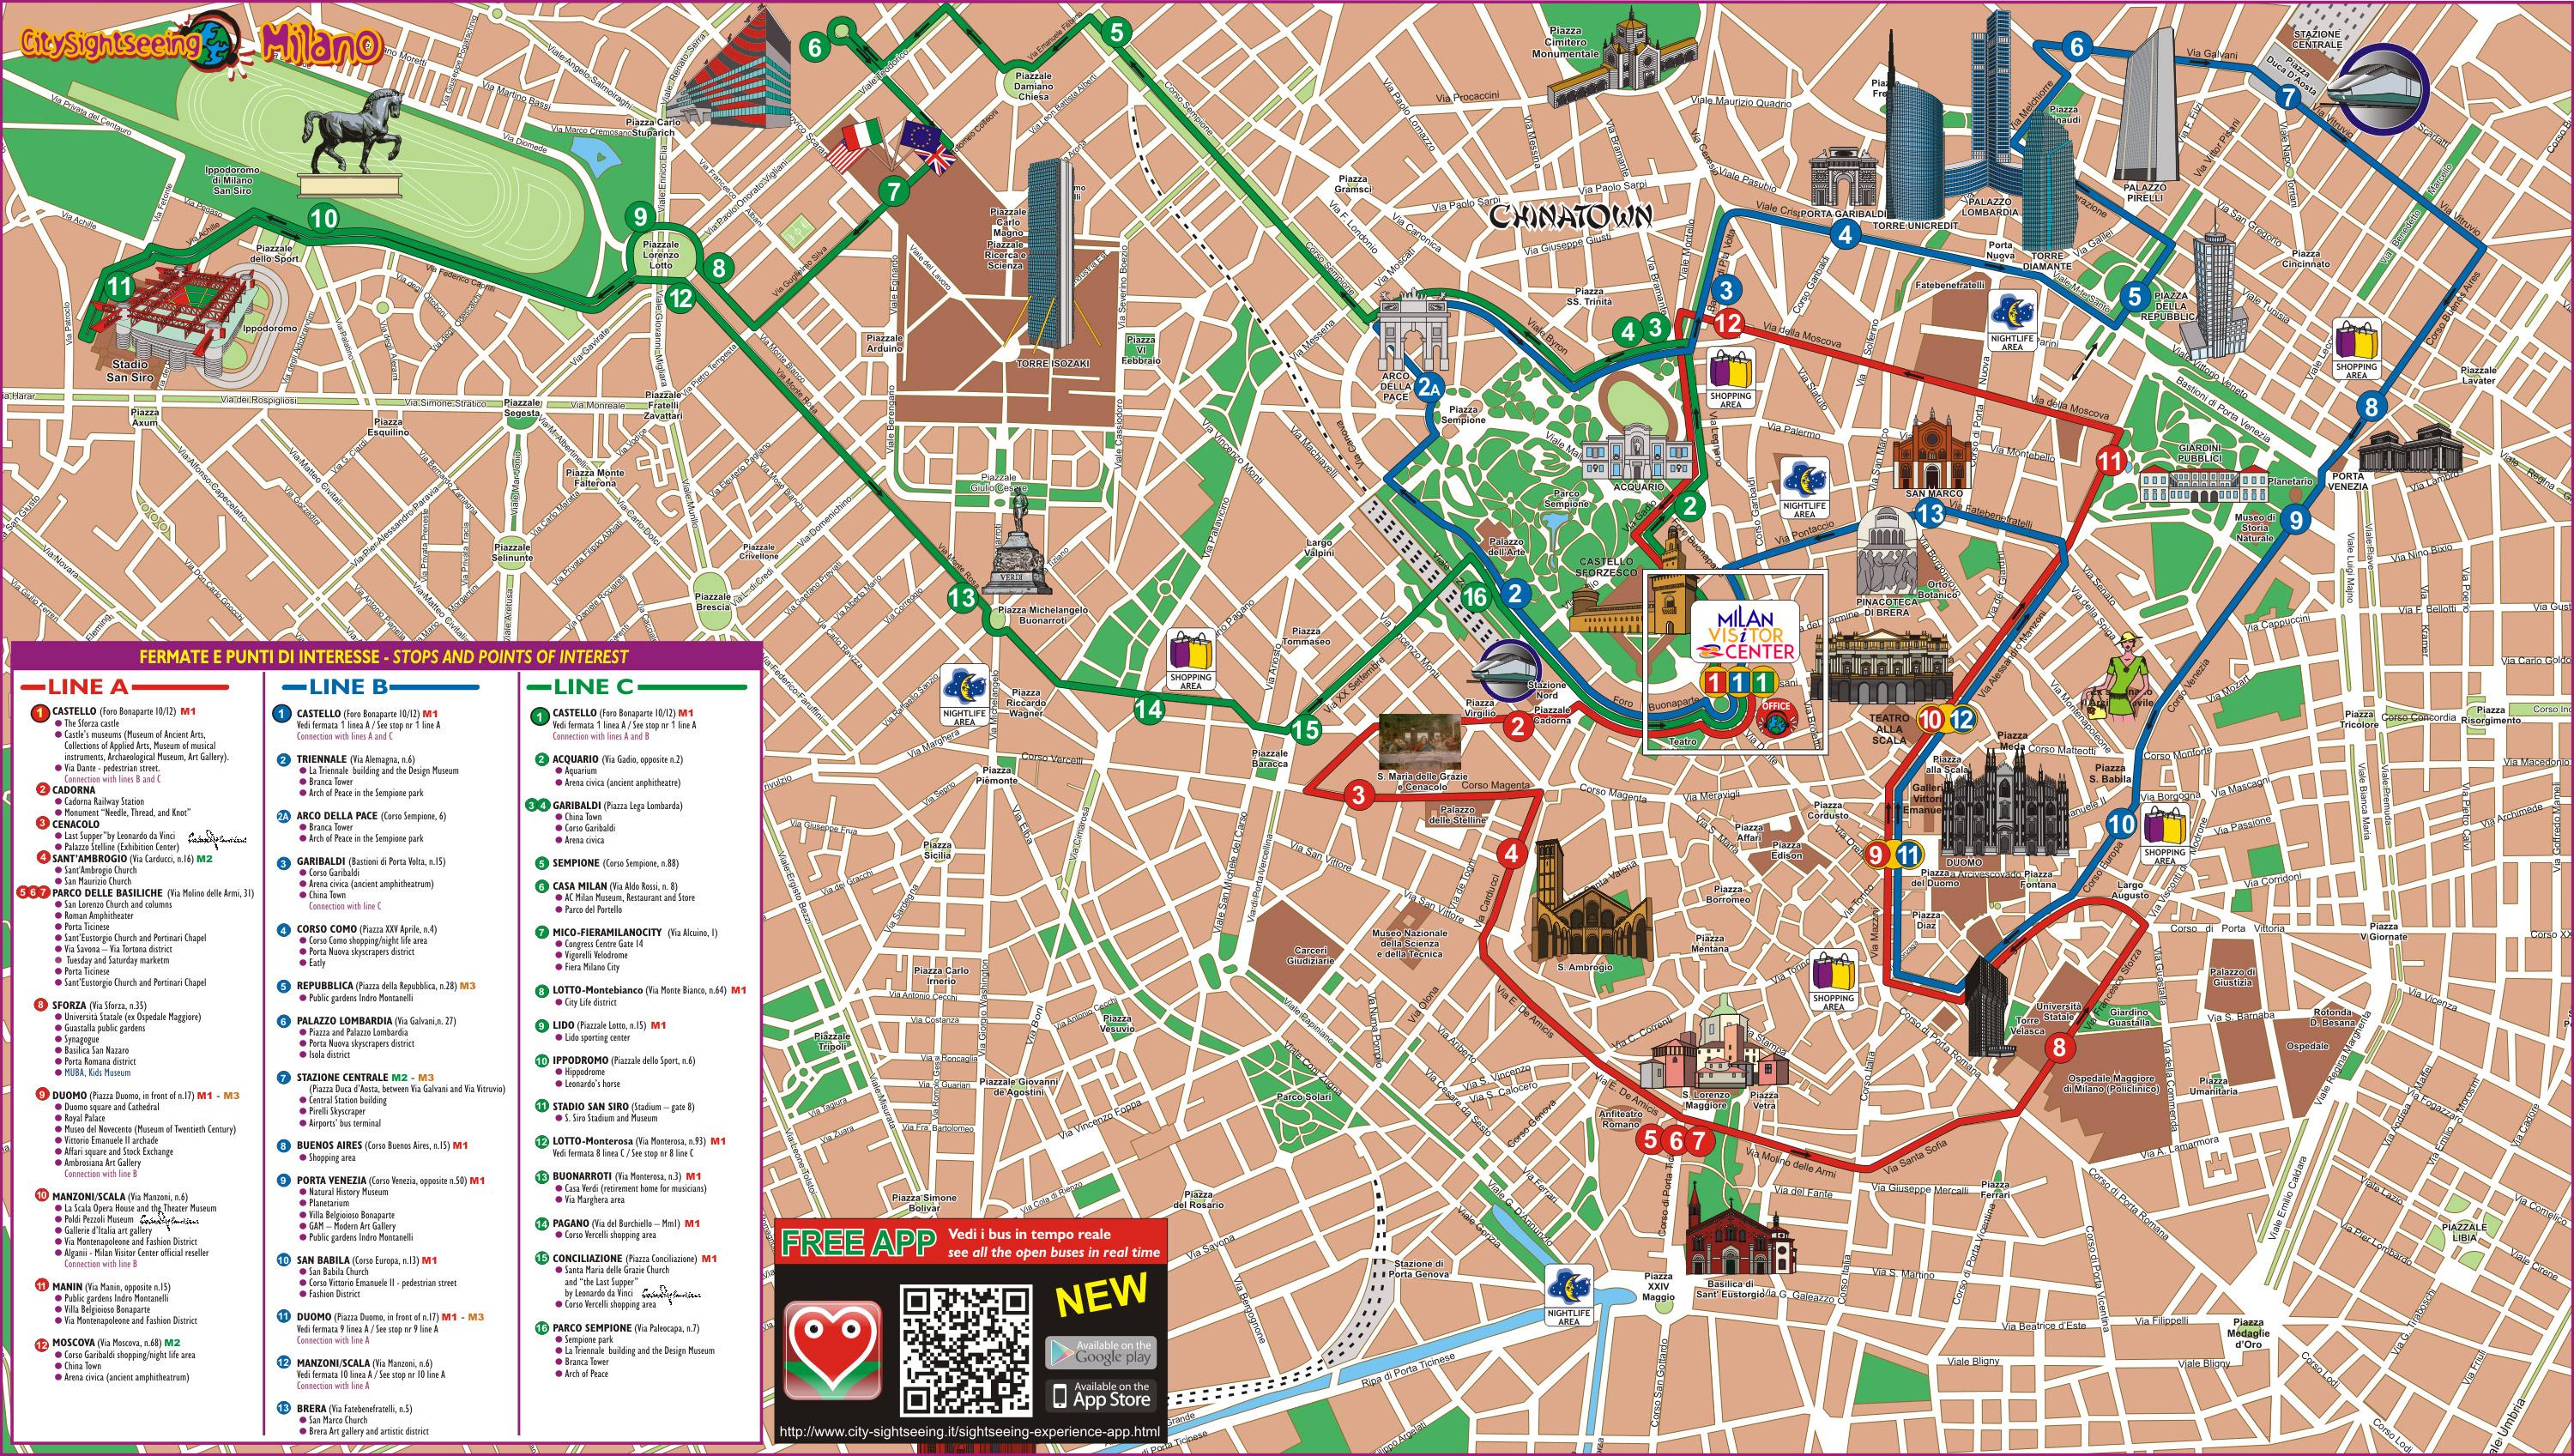 Milan bus route map - Map of milan bus route (Lombardy - Italy)